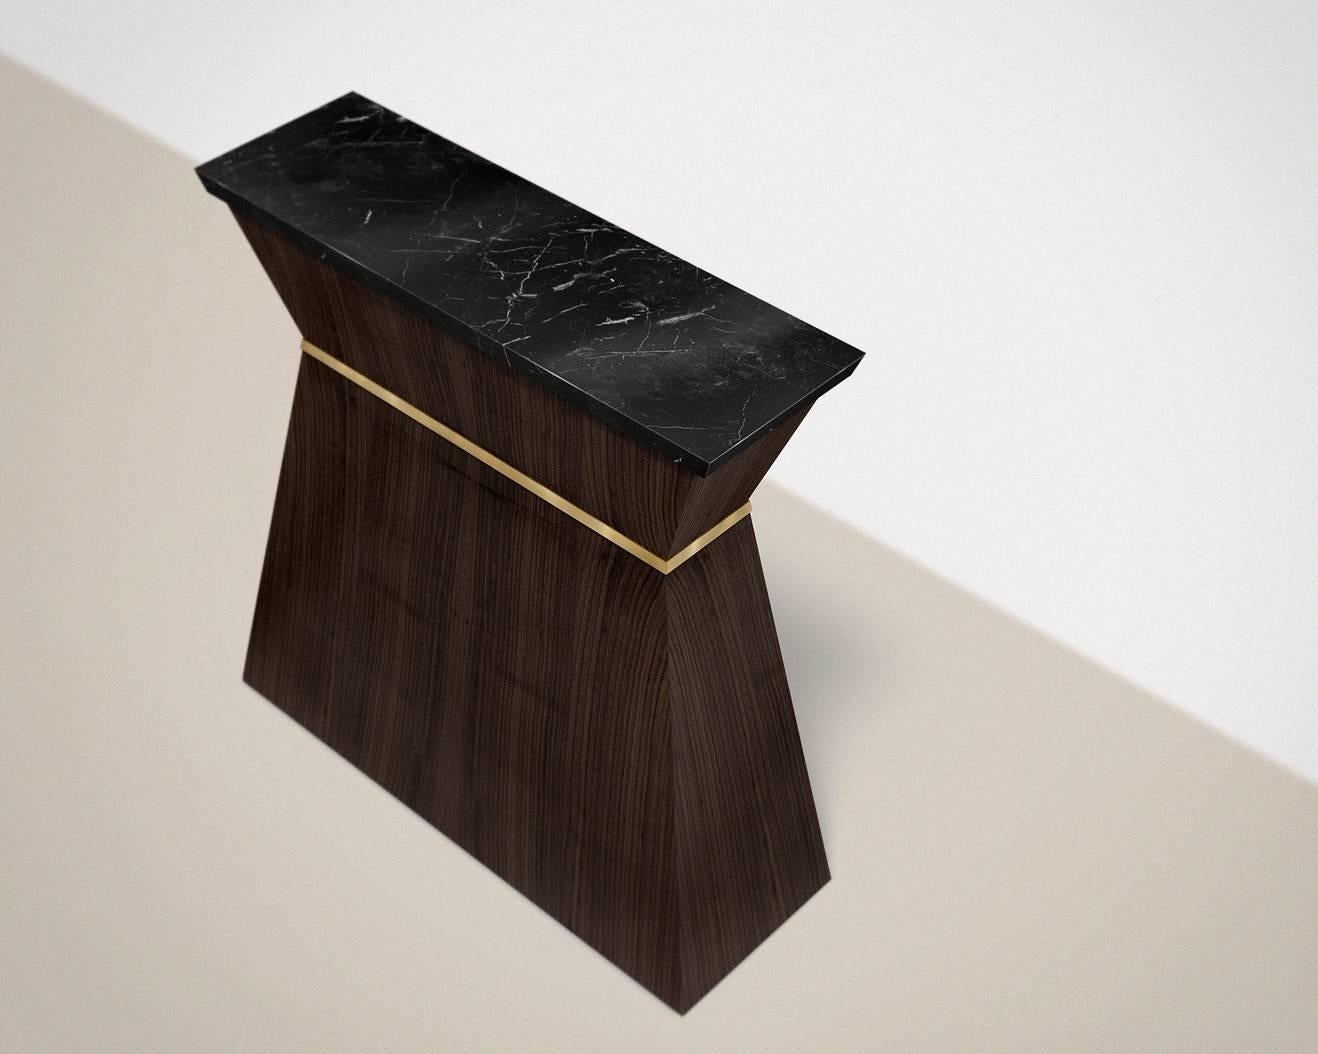 Console designed by French design studio Hormé

Piece numbered and signed

Walnut matt varnish, brass girdle and Marquina marble-top.

Measures: 100 x 77 x 24 cm (standard-size).

Inspired by Greek mythology, its richness and poetry, Hormé